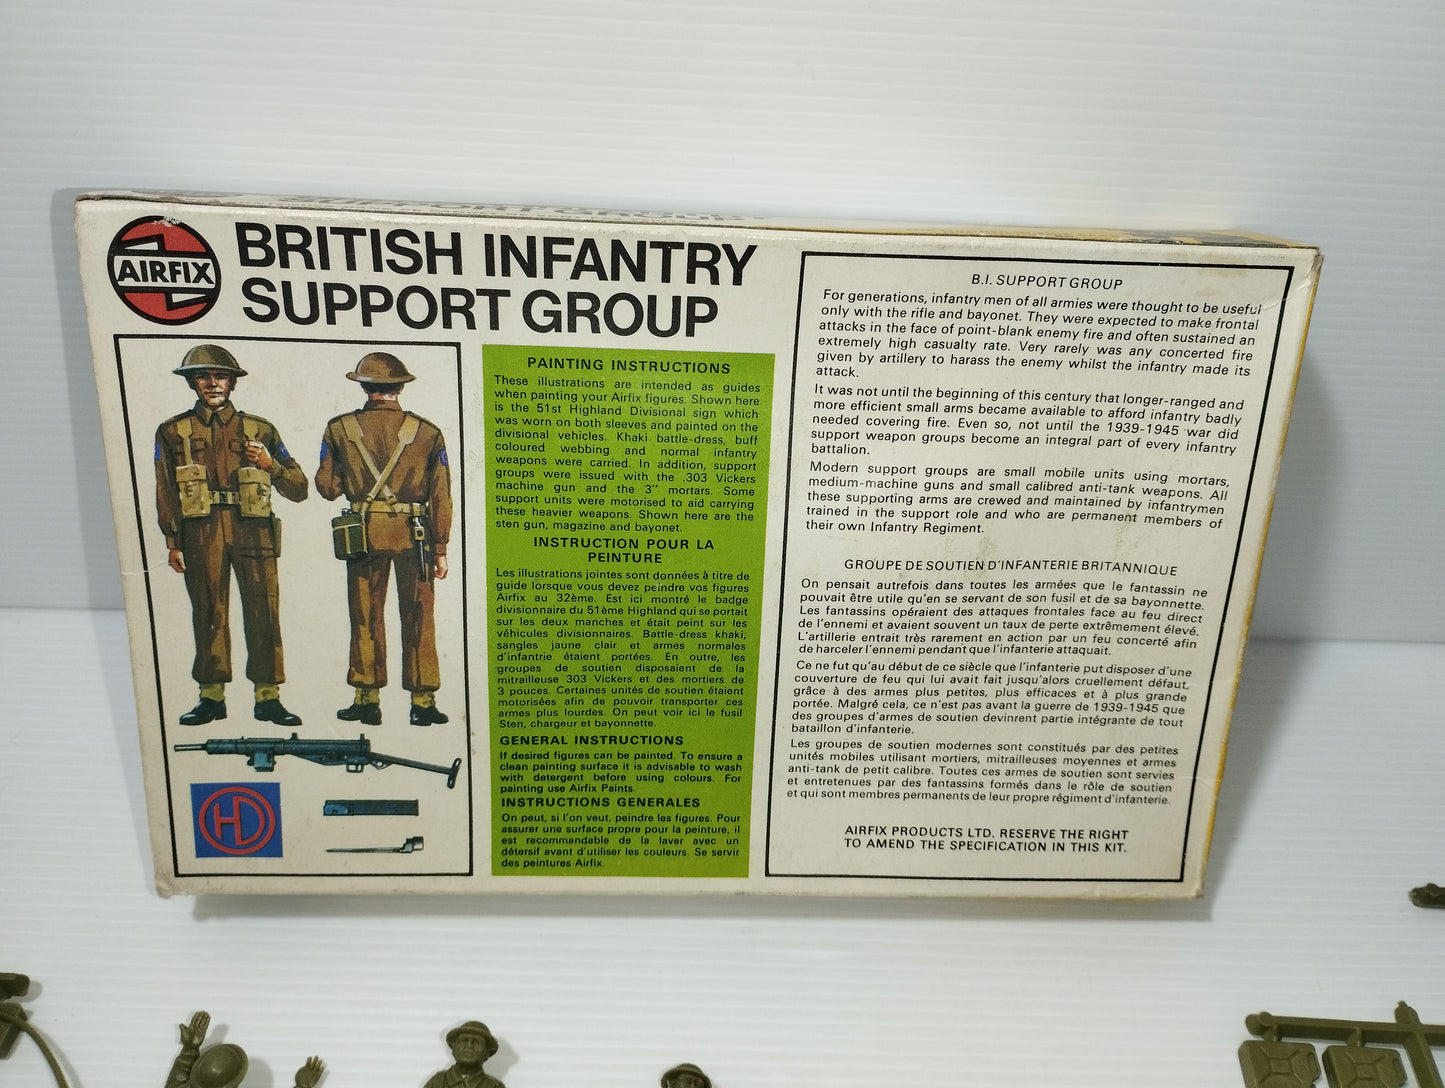 Scatola Airfix British Infantry Supporto Group
Scala 1:32
Made in England